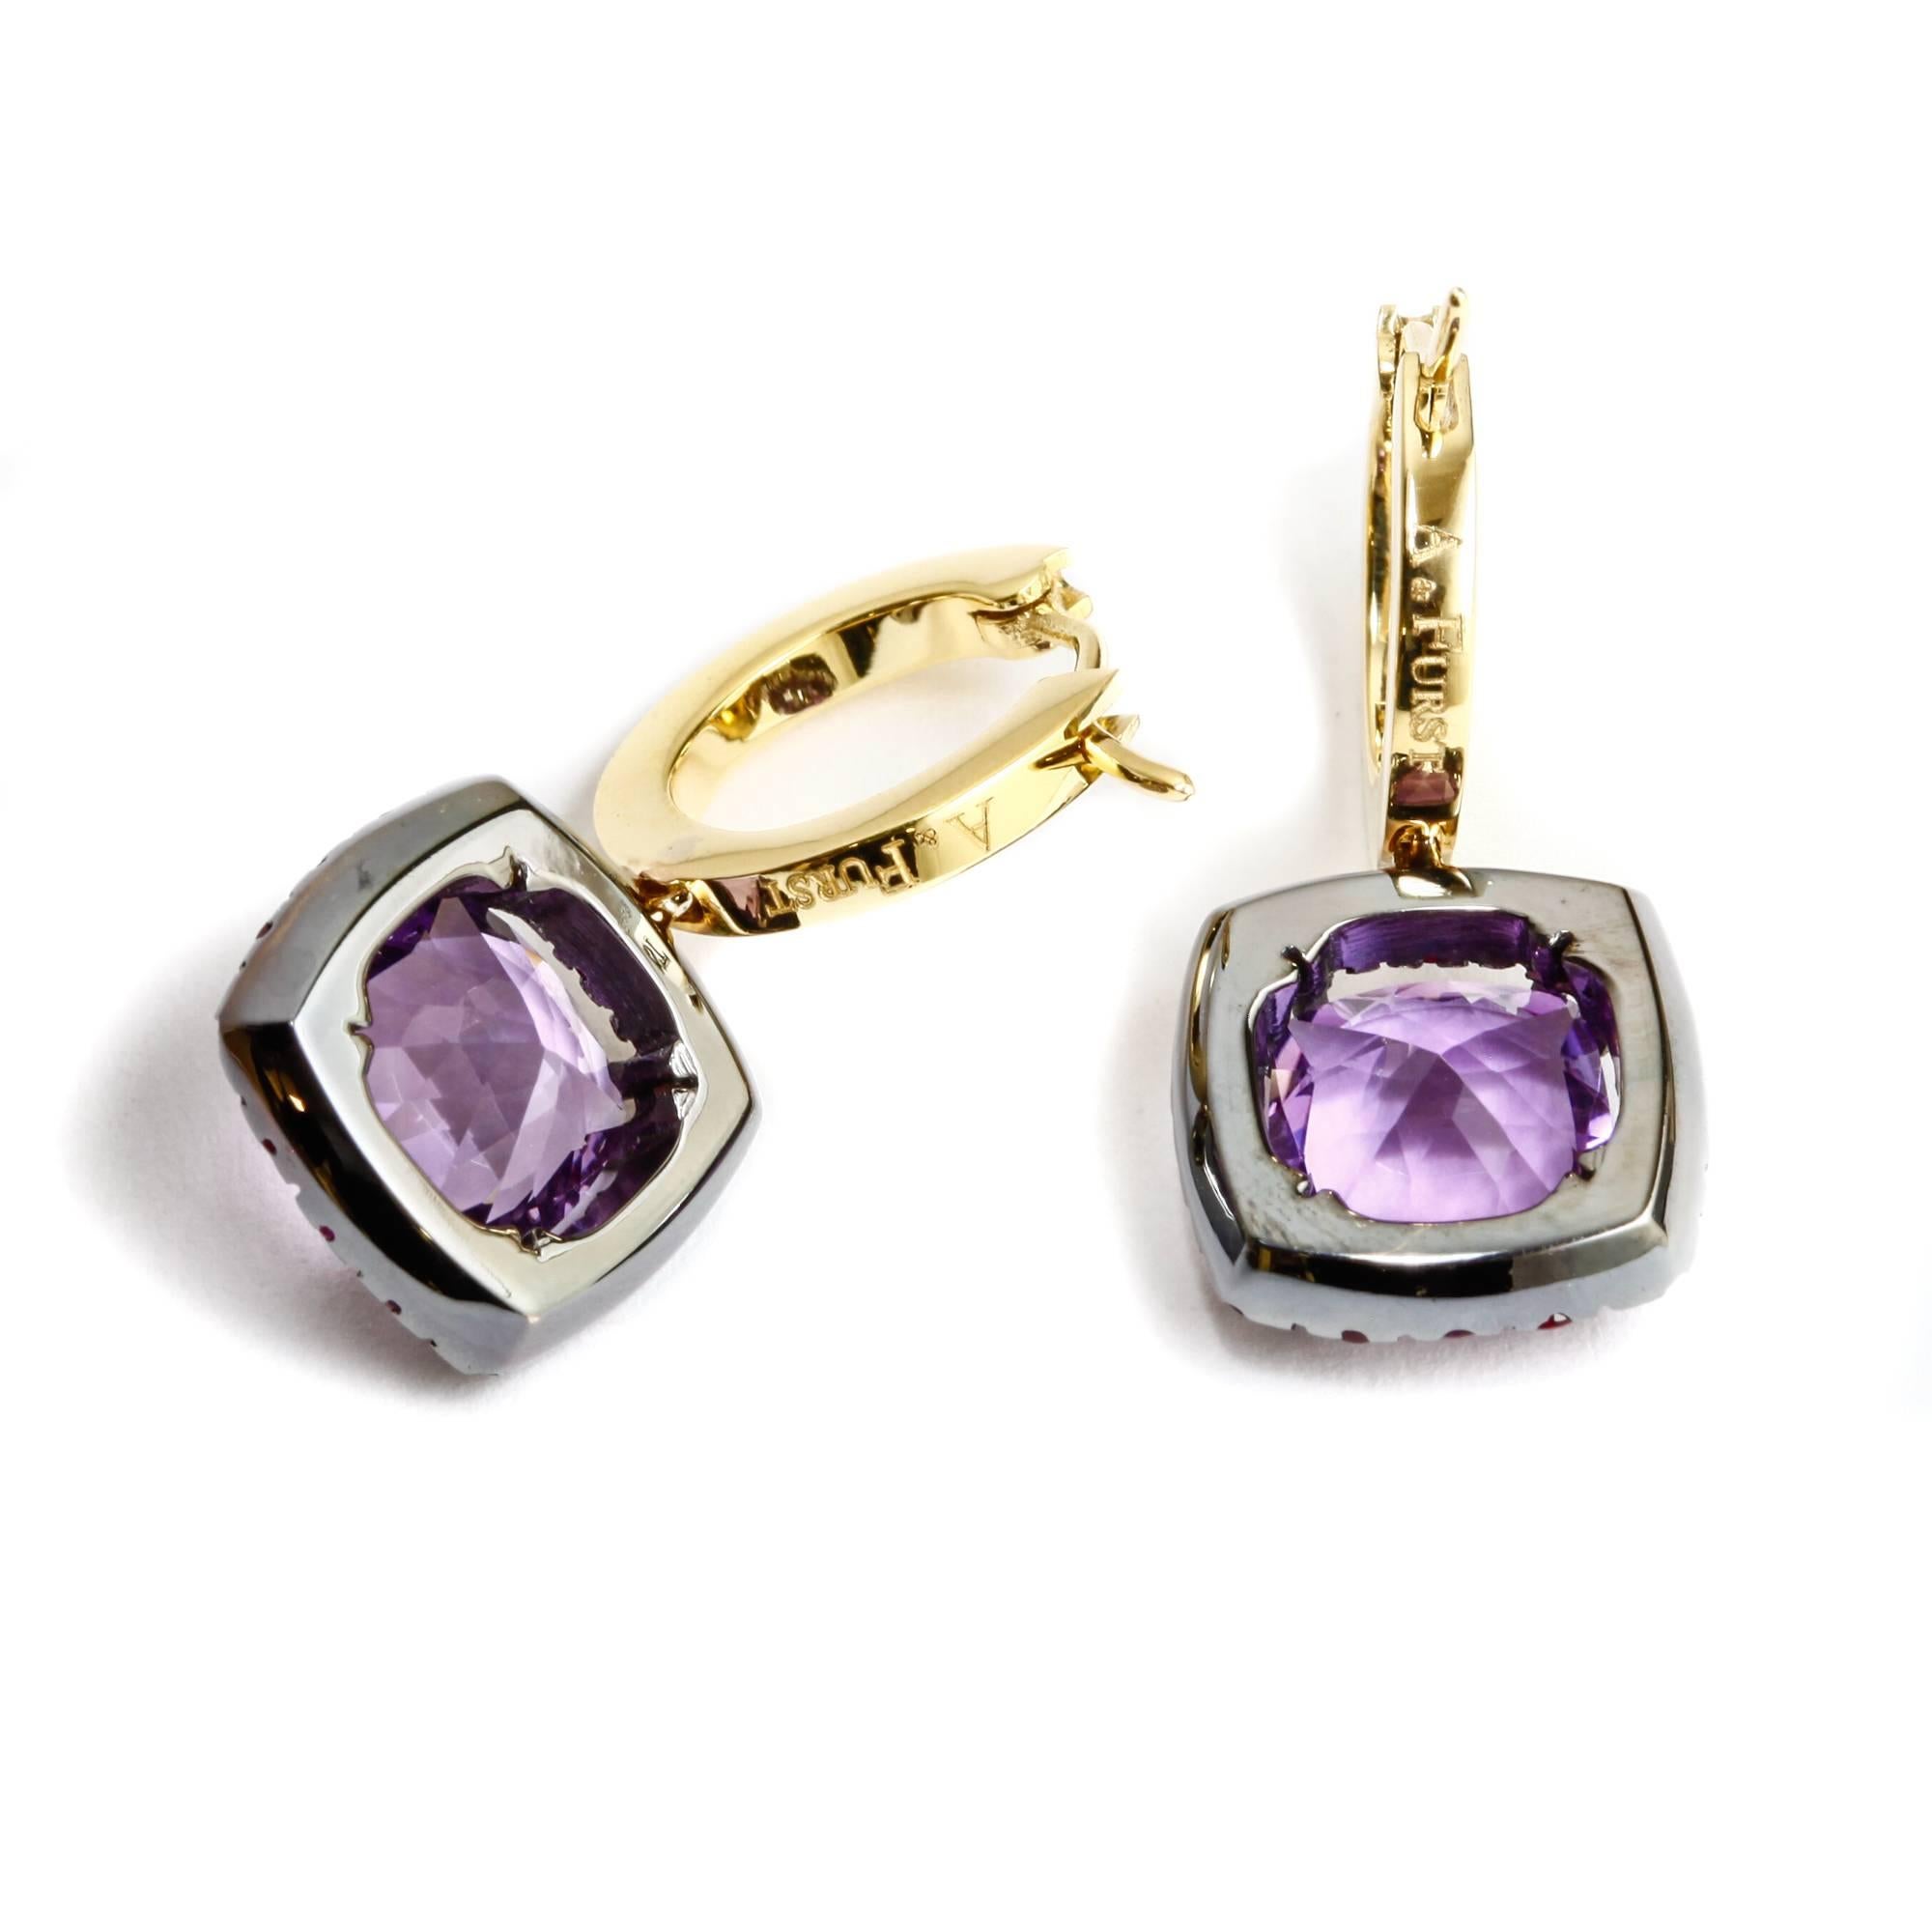 These A & Furst drop earrings feature 3.00 ct. total of square cushion cut amethysts surrounded by a halos made of 0.91 ct. total round rubies set in 18k black gold. The stones hang from 18k yellow gold huggies. The earrings are in perfect